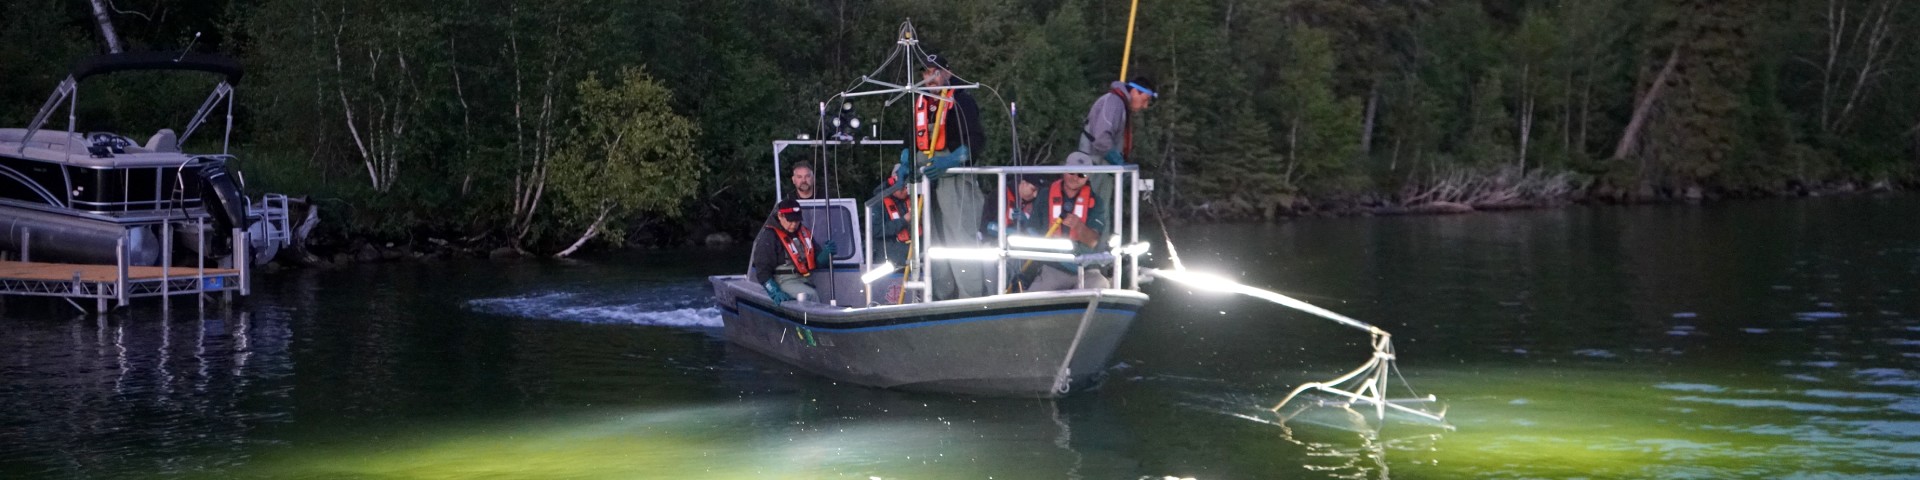 Crew aboard an electrofishing boat at dusk illuminate the lake as they trail suspended gear through the water.